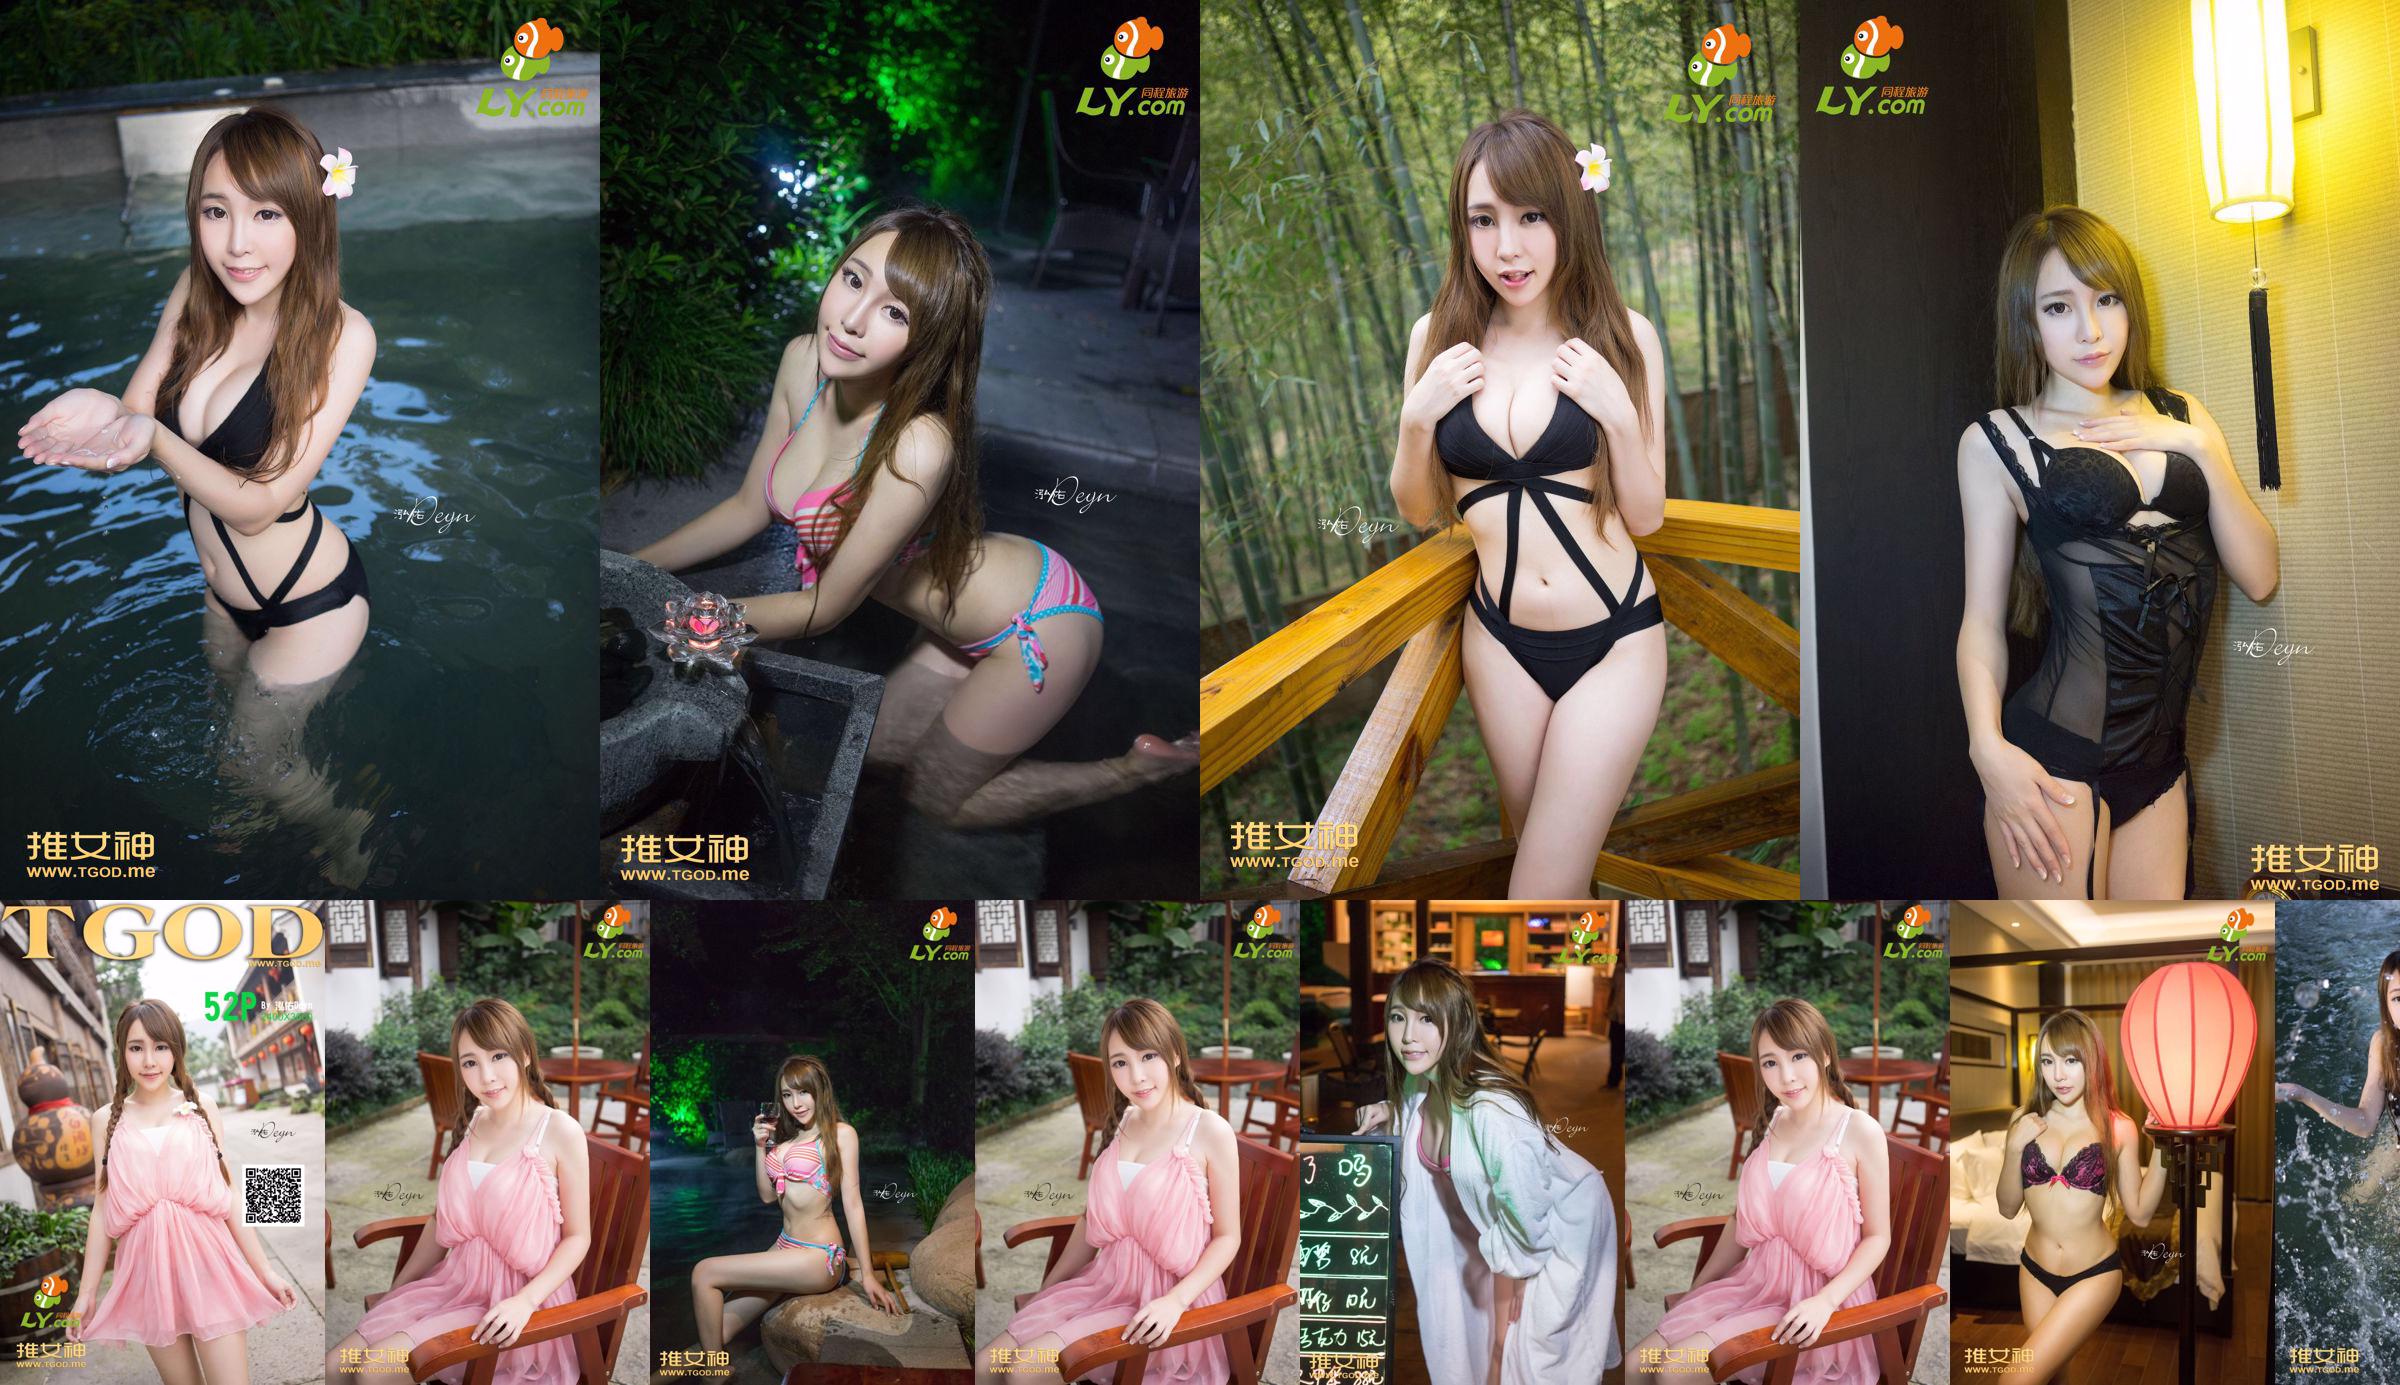 Huang Mengxian "Where Is the Goddess Going Issue 7" [TGOD Push Goddess] No.c5a012 Pagina 1